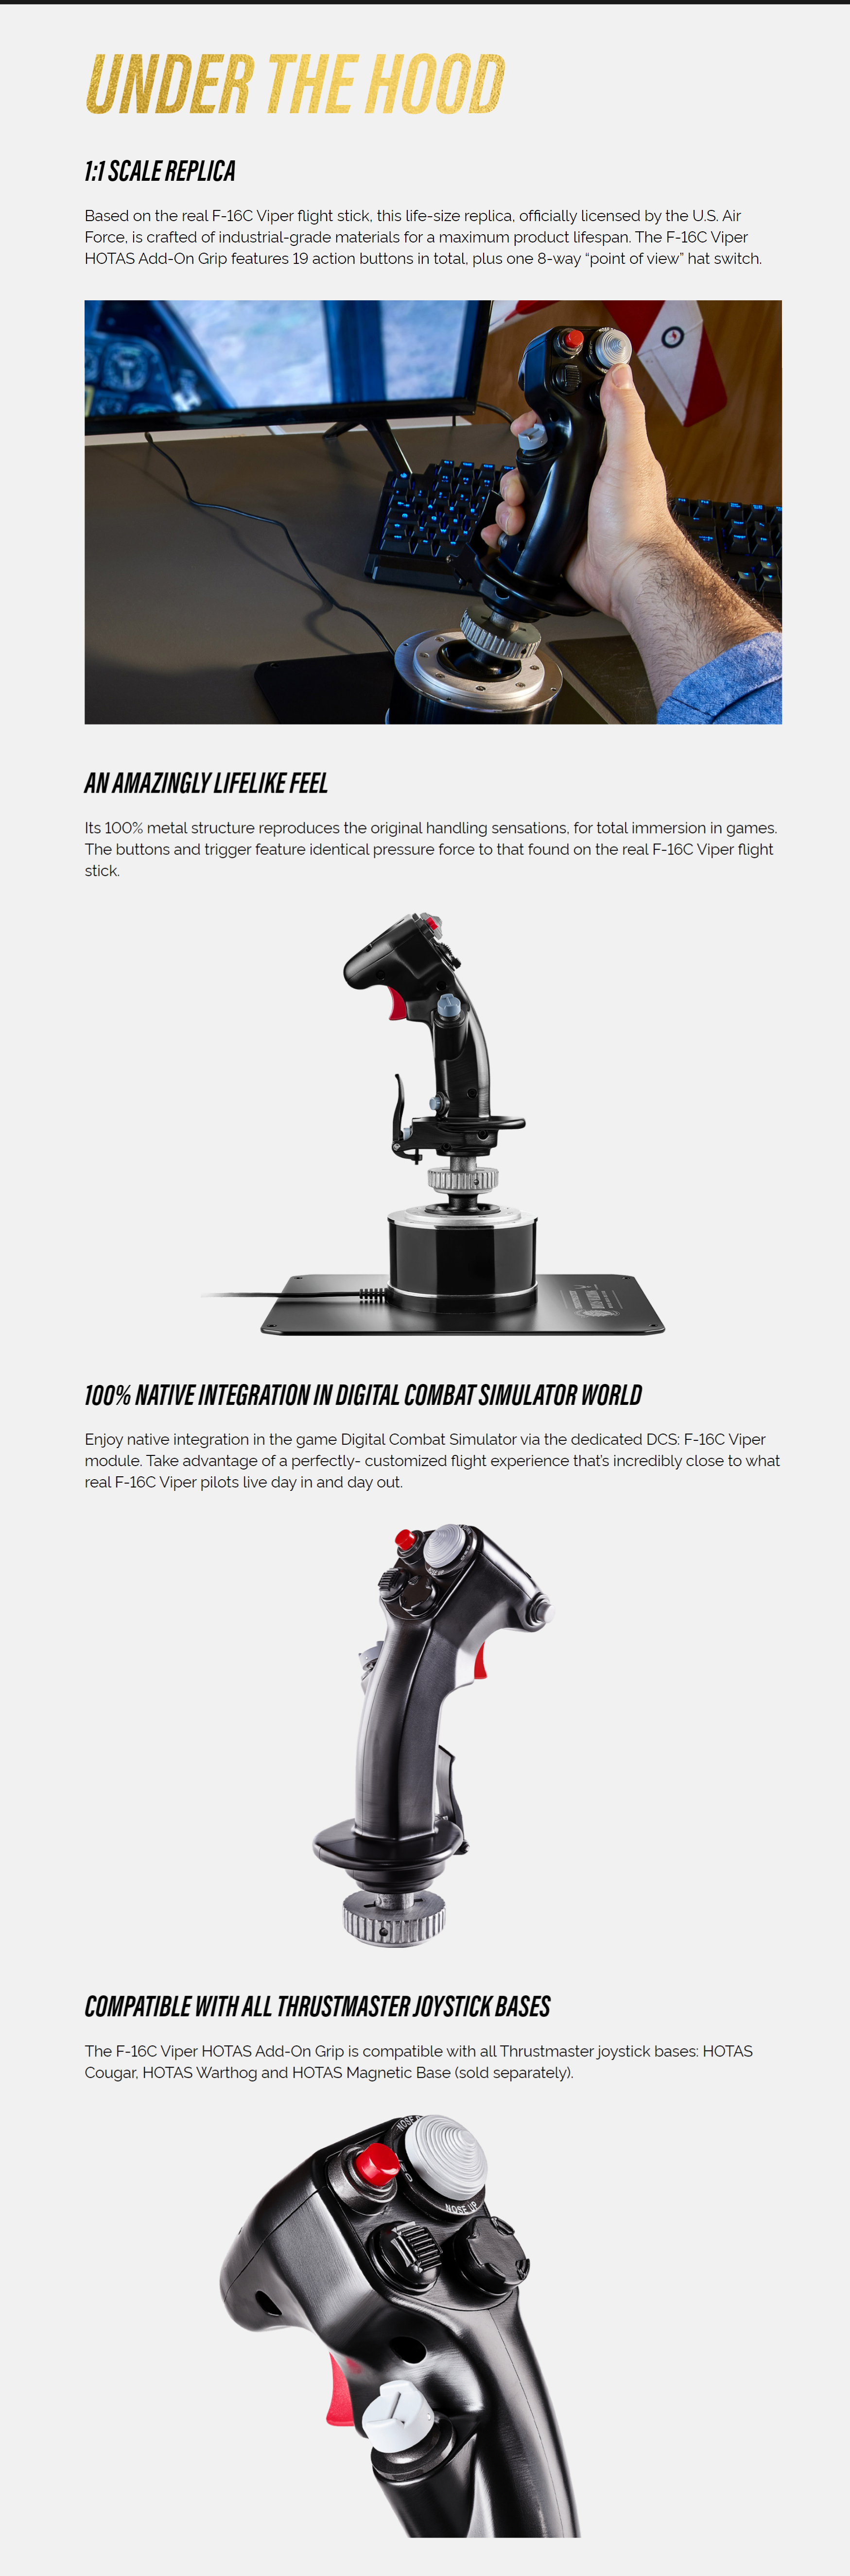 A large marketing image providing additional information about the product Thrustmaster F-16C Viper - HOTAS Add-On Grip for Cougar & Warthog Bases - Additional alt info not provided